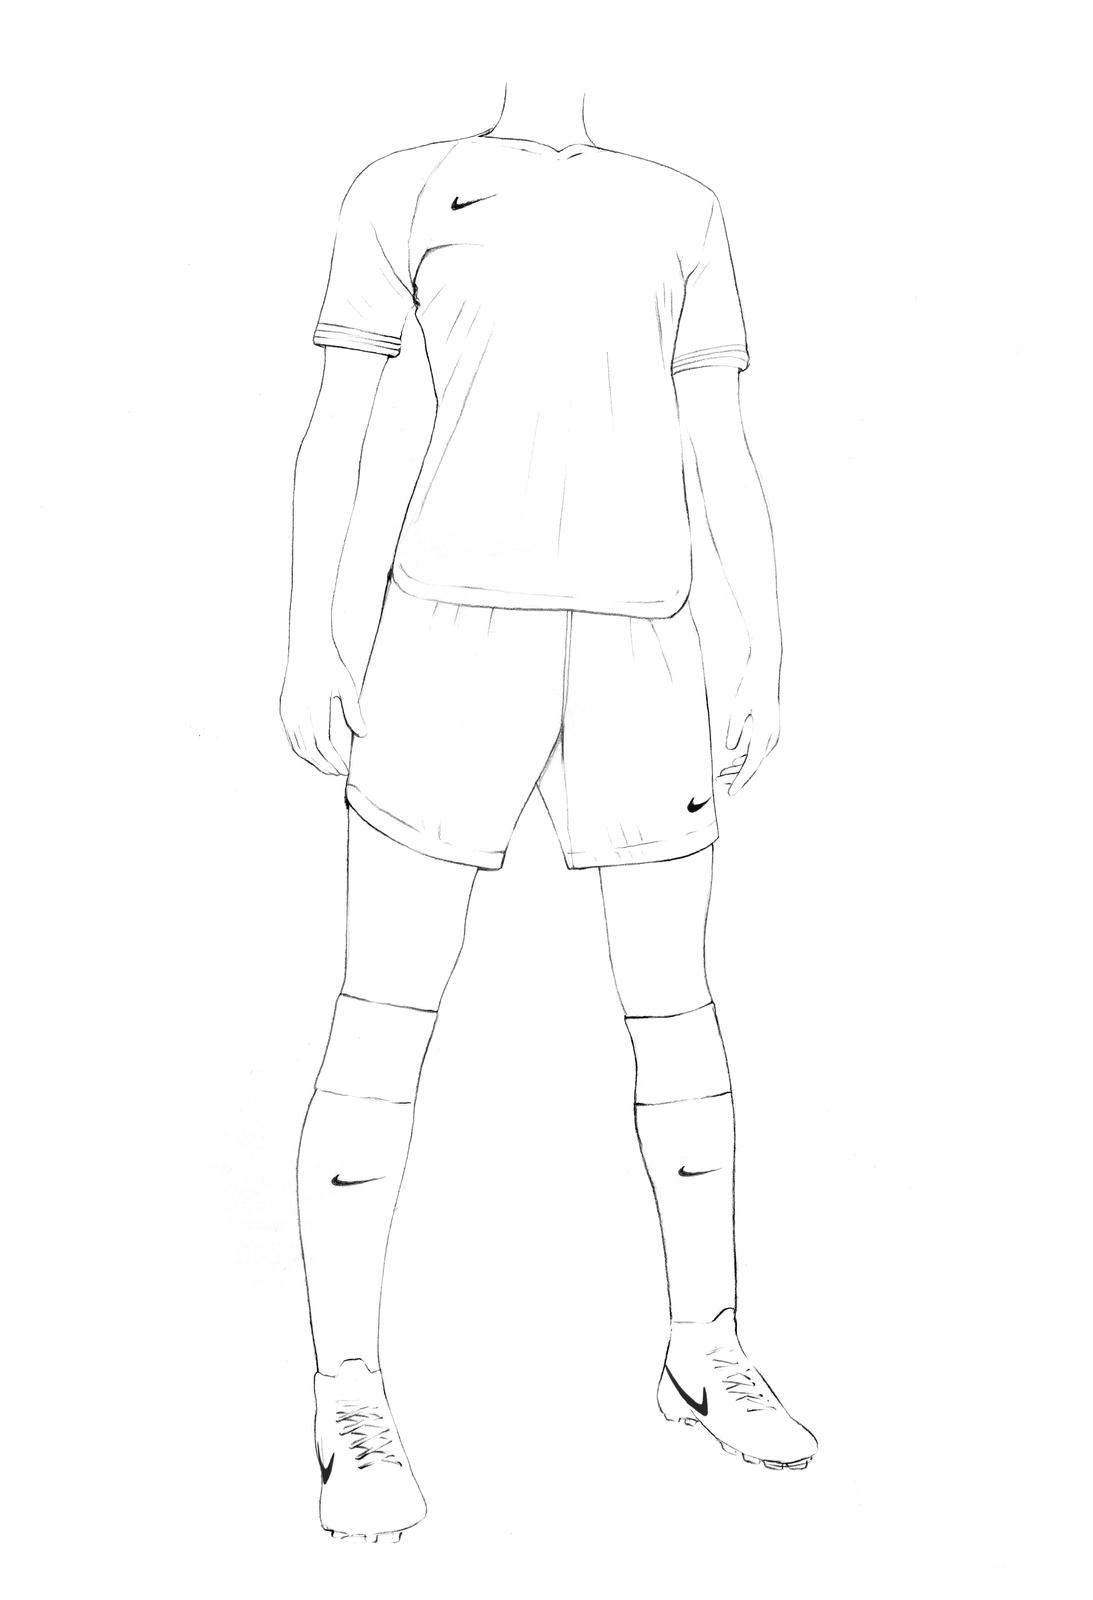 The 2019 Nike women's football kit is the result of three years of physiological testing and perception research. Illustration by Caroline Andrieu. Nike